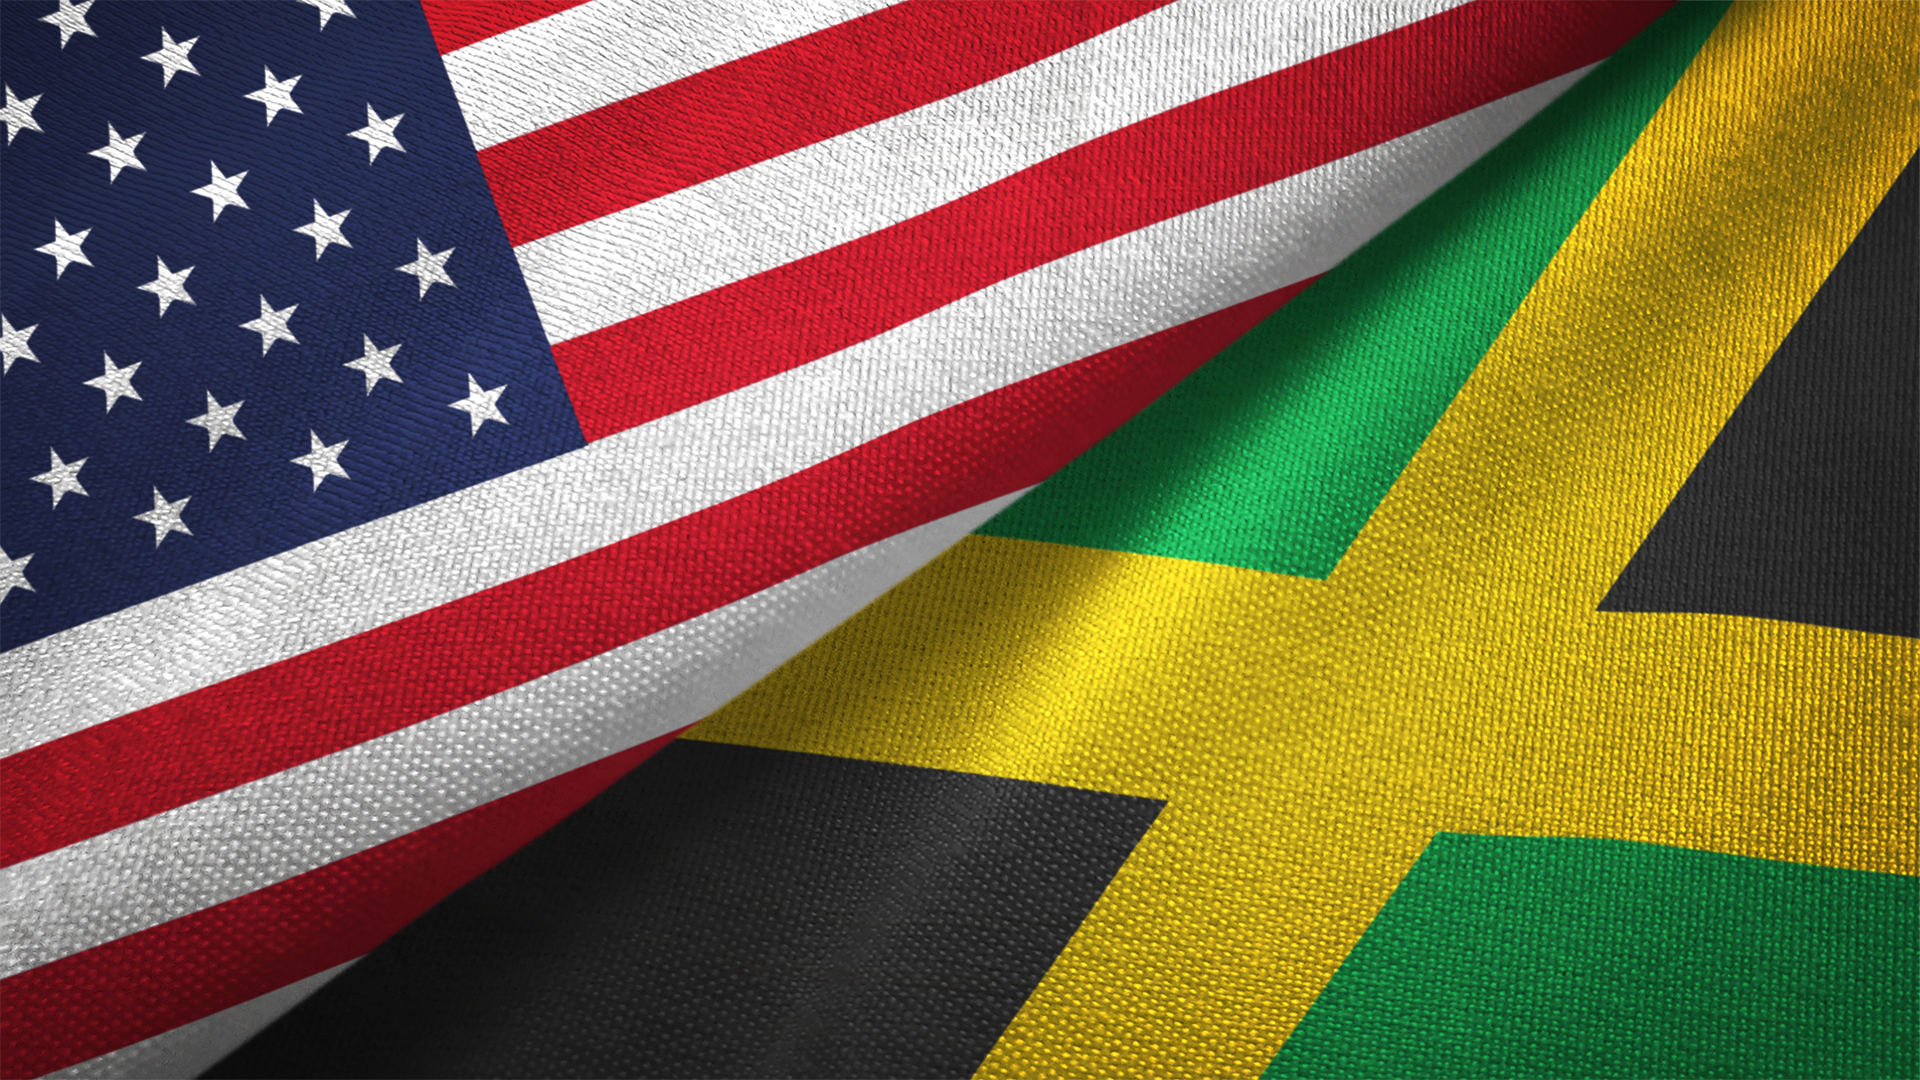 United States and Jamaica two flags textile cloth, fabric texture Image